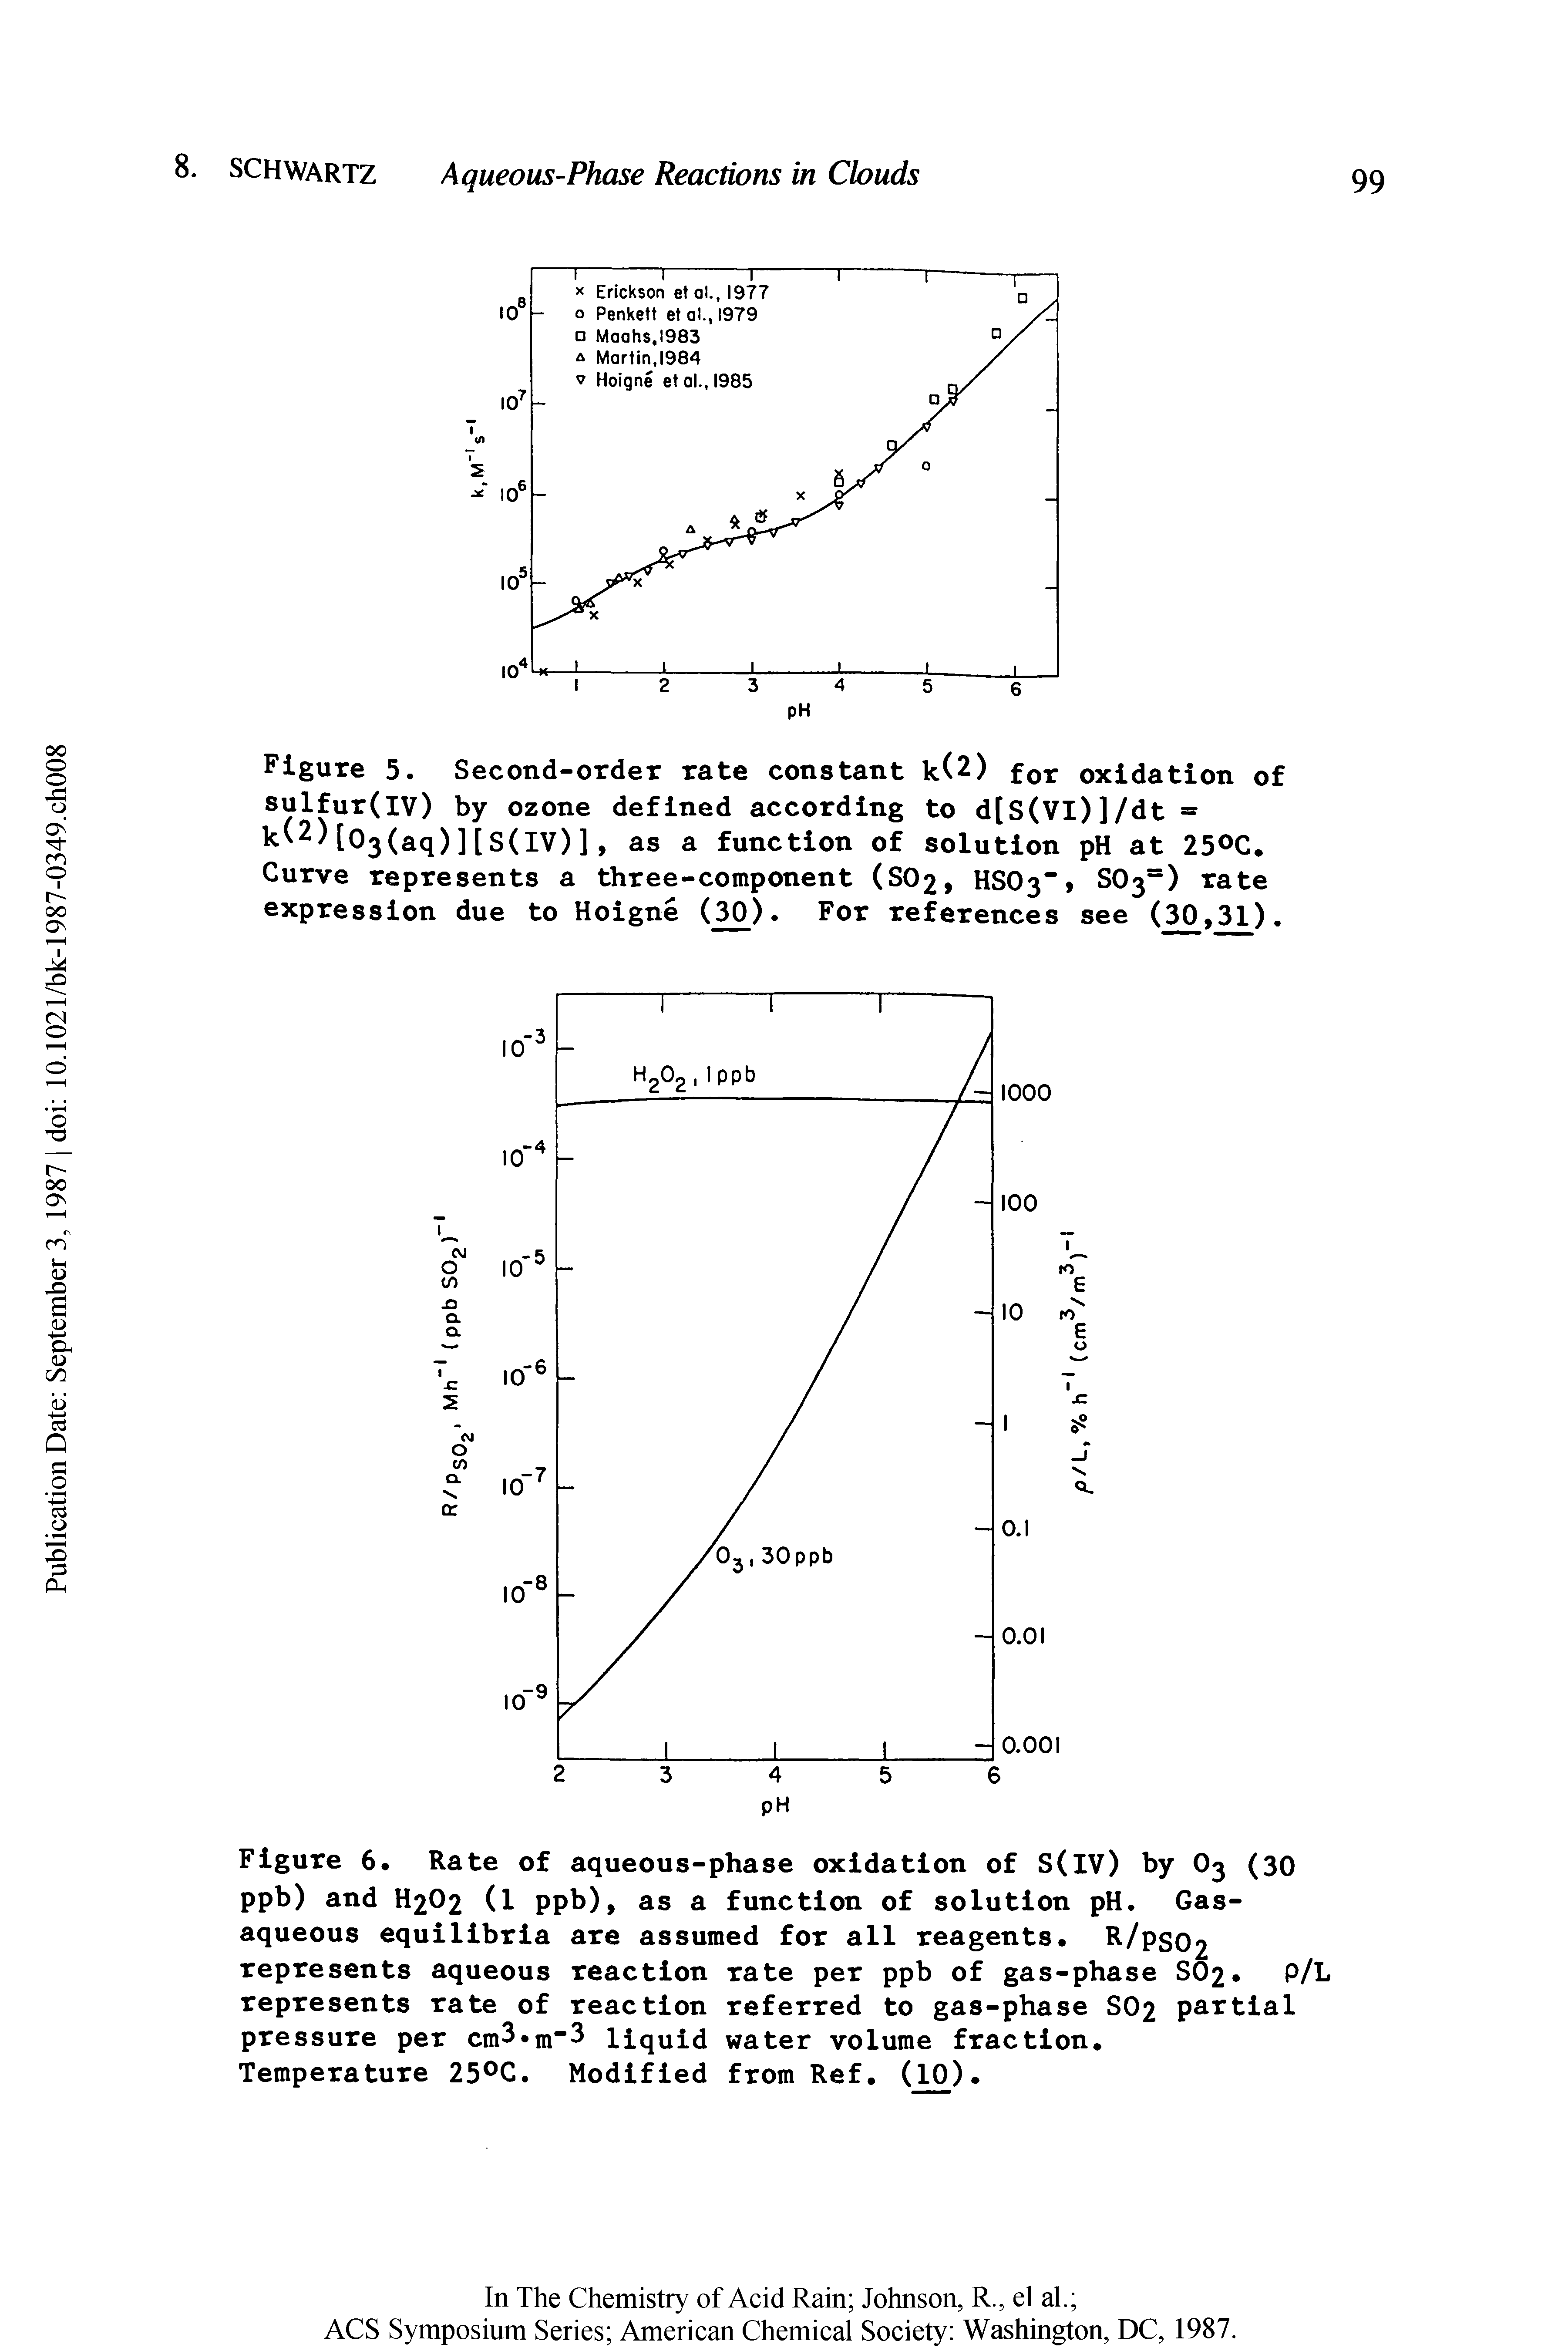 Figure 6. Rate of aqueous-phase oxidation of S(IV) by O3 (30 ppb) and H2O2 (l ppb), as a function of solution pH. Gas-aqueous equilibria are assumed for all reagents. R/PSO2 represents aqueous reaction rate per ppb of gas-phase S02 P/L represents rate of reaction referred to gas-phase SO2 partial pressure per cm3 m 3 liquid water volume fraction.